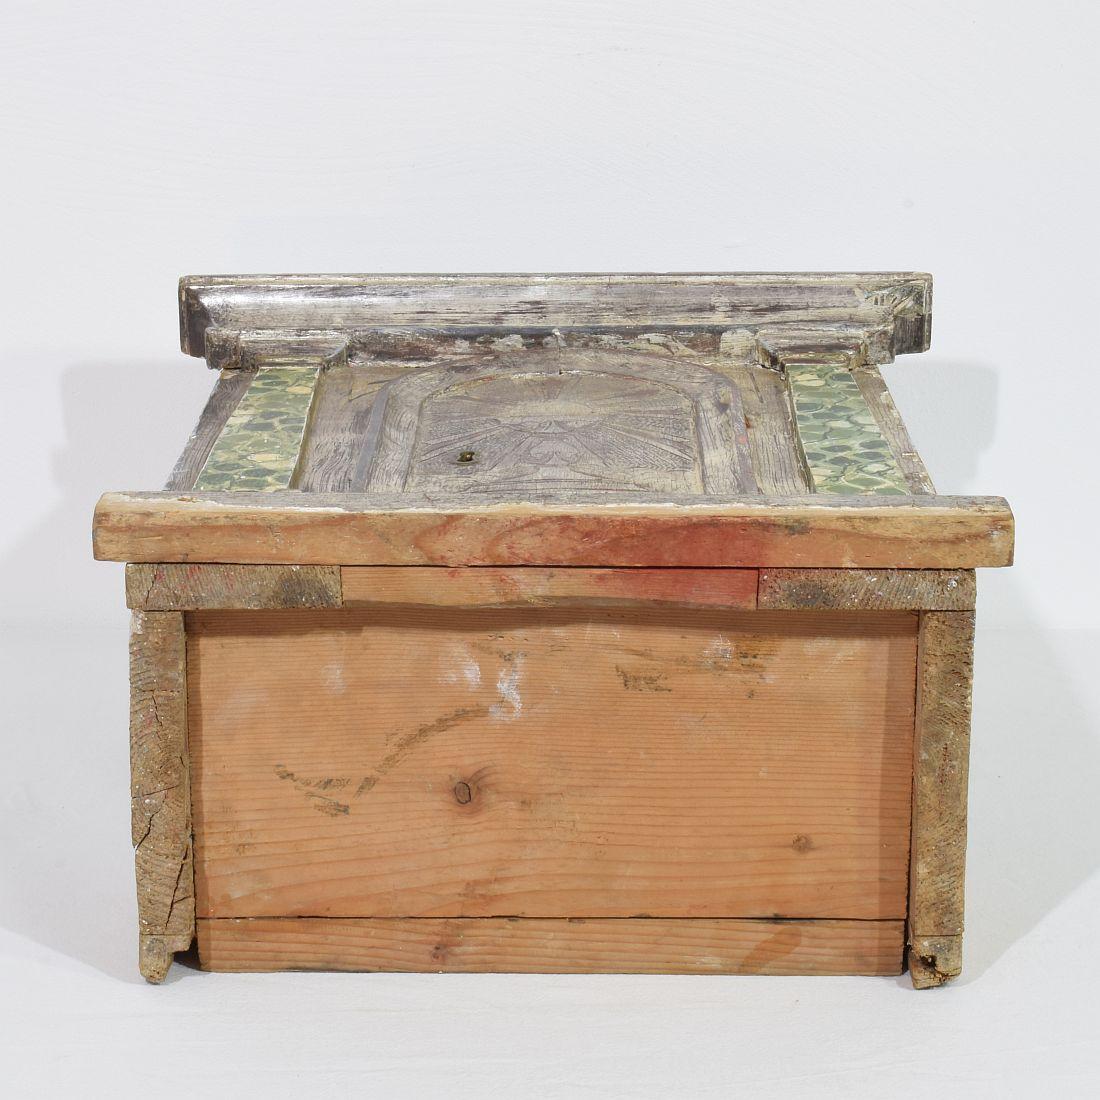 Italian 18th Century Neoclassical Silvered And Painted Wooden Tabernacle For Sale 12